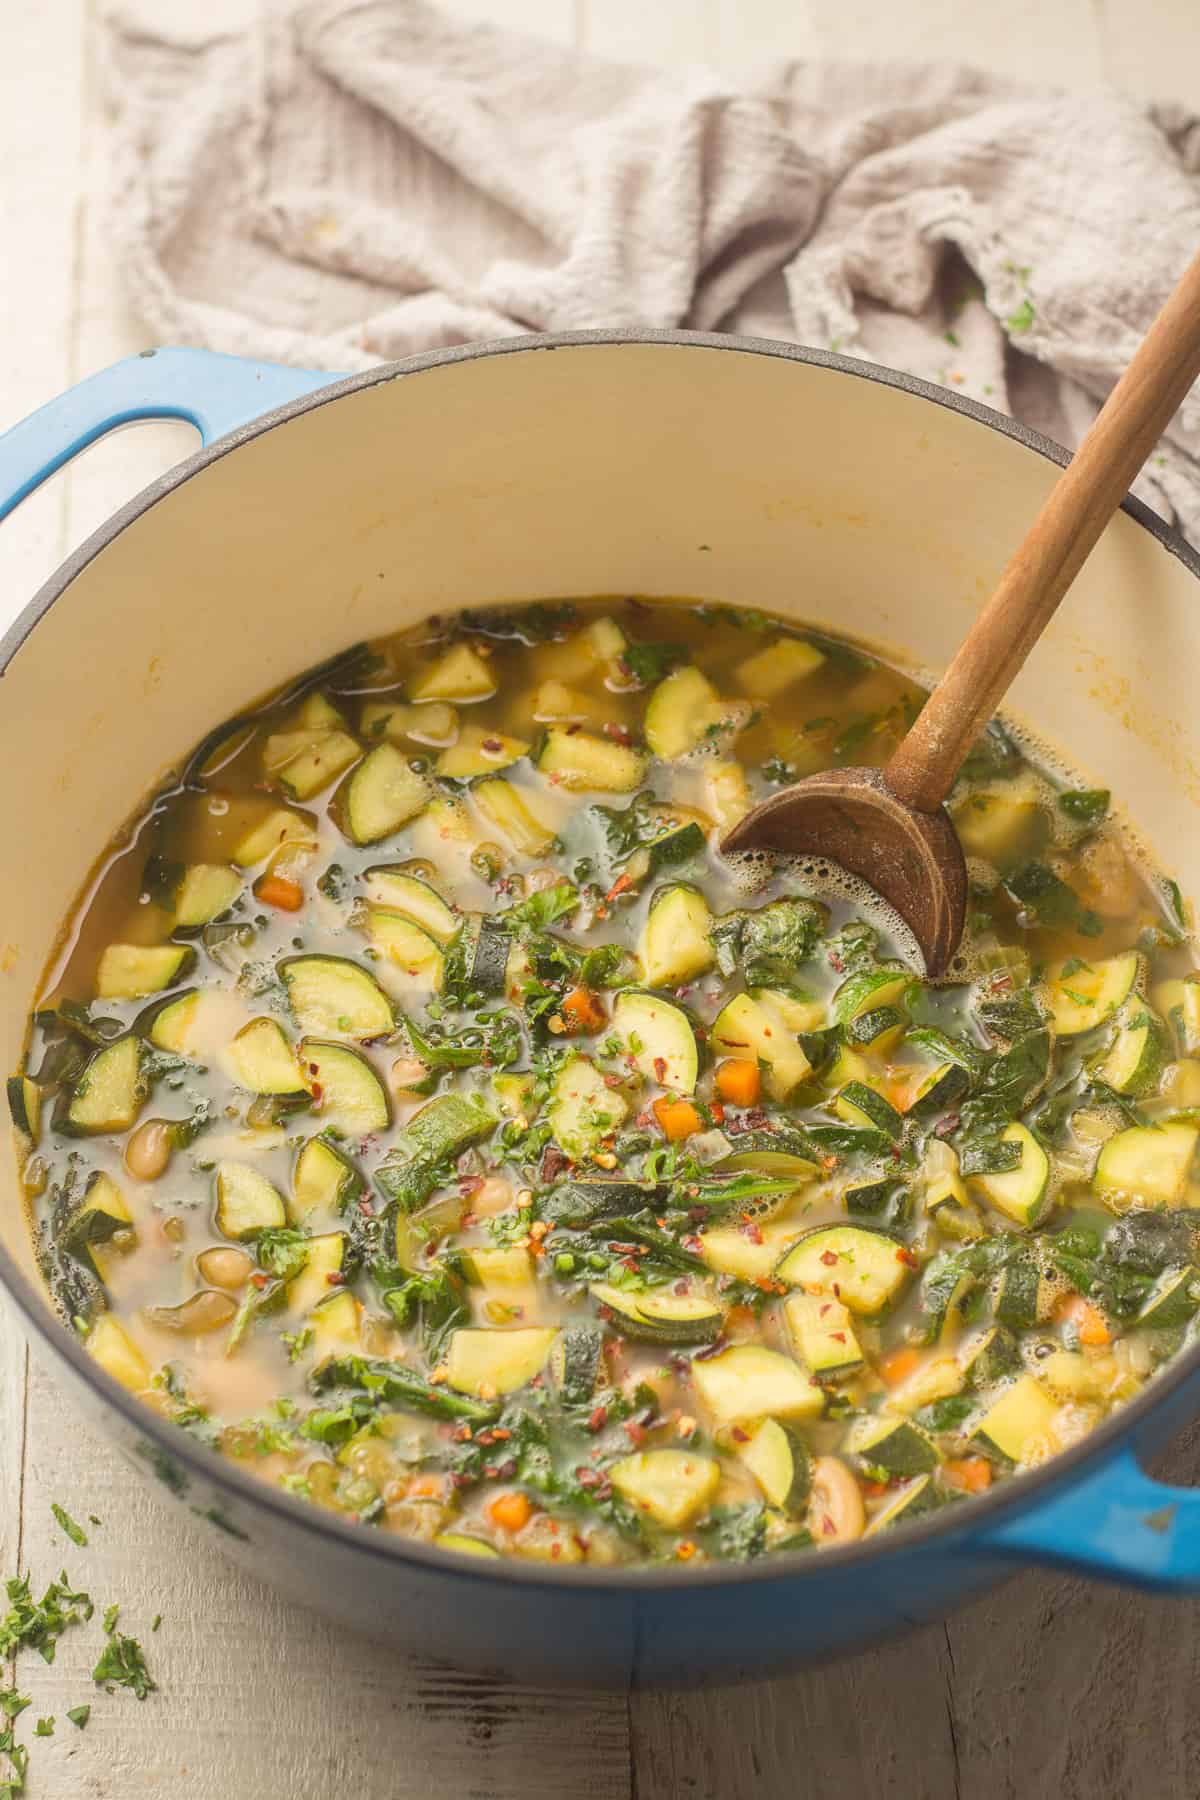 Pot of Zucchini Soup with a Wooden Spoon